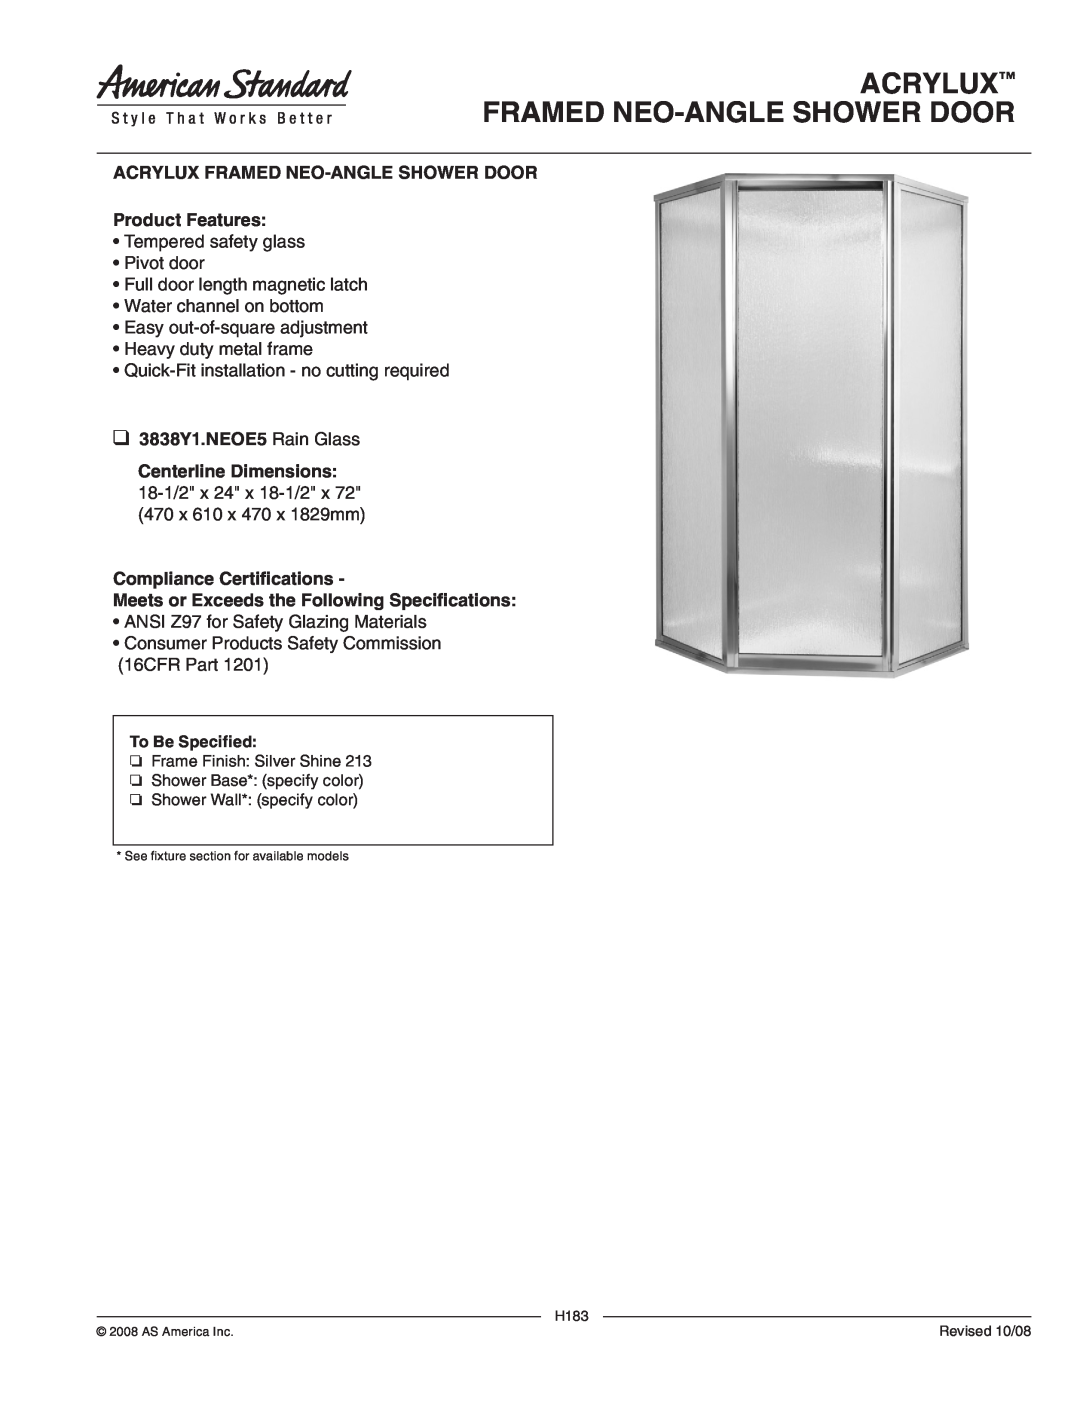 American Standard 3838Y1.NEOE5 dimensions Acrylux Framed Neo-Angleshower Door, Product Features, Compliance Certifications 